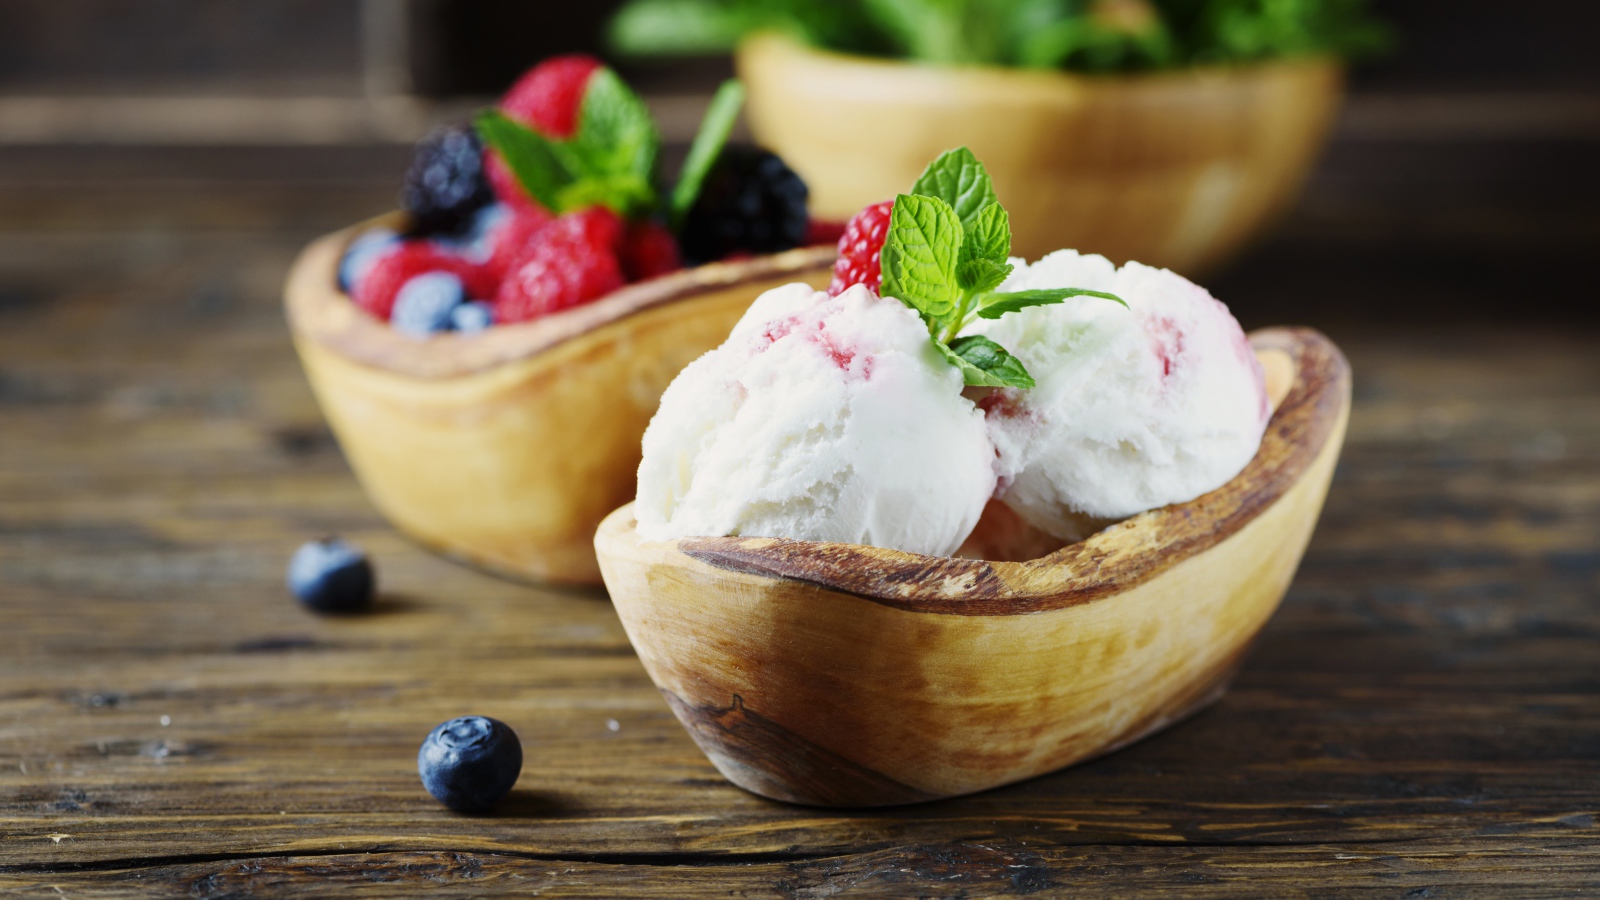 Ice cream balls with berries in a wooden bowl